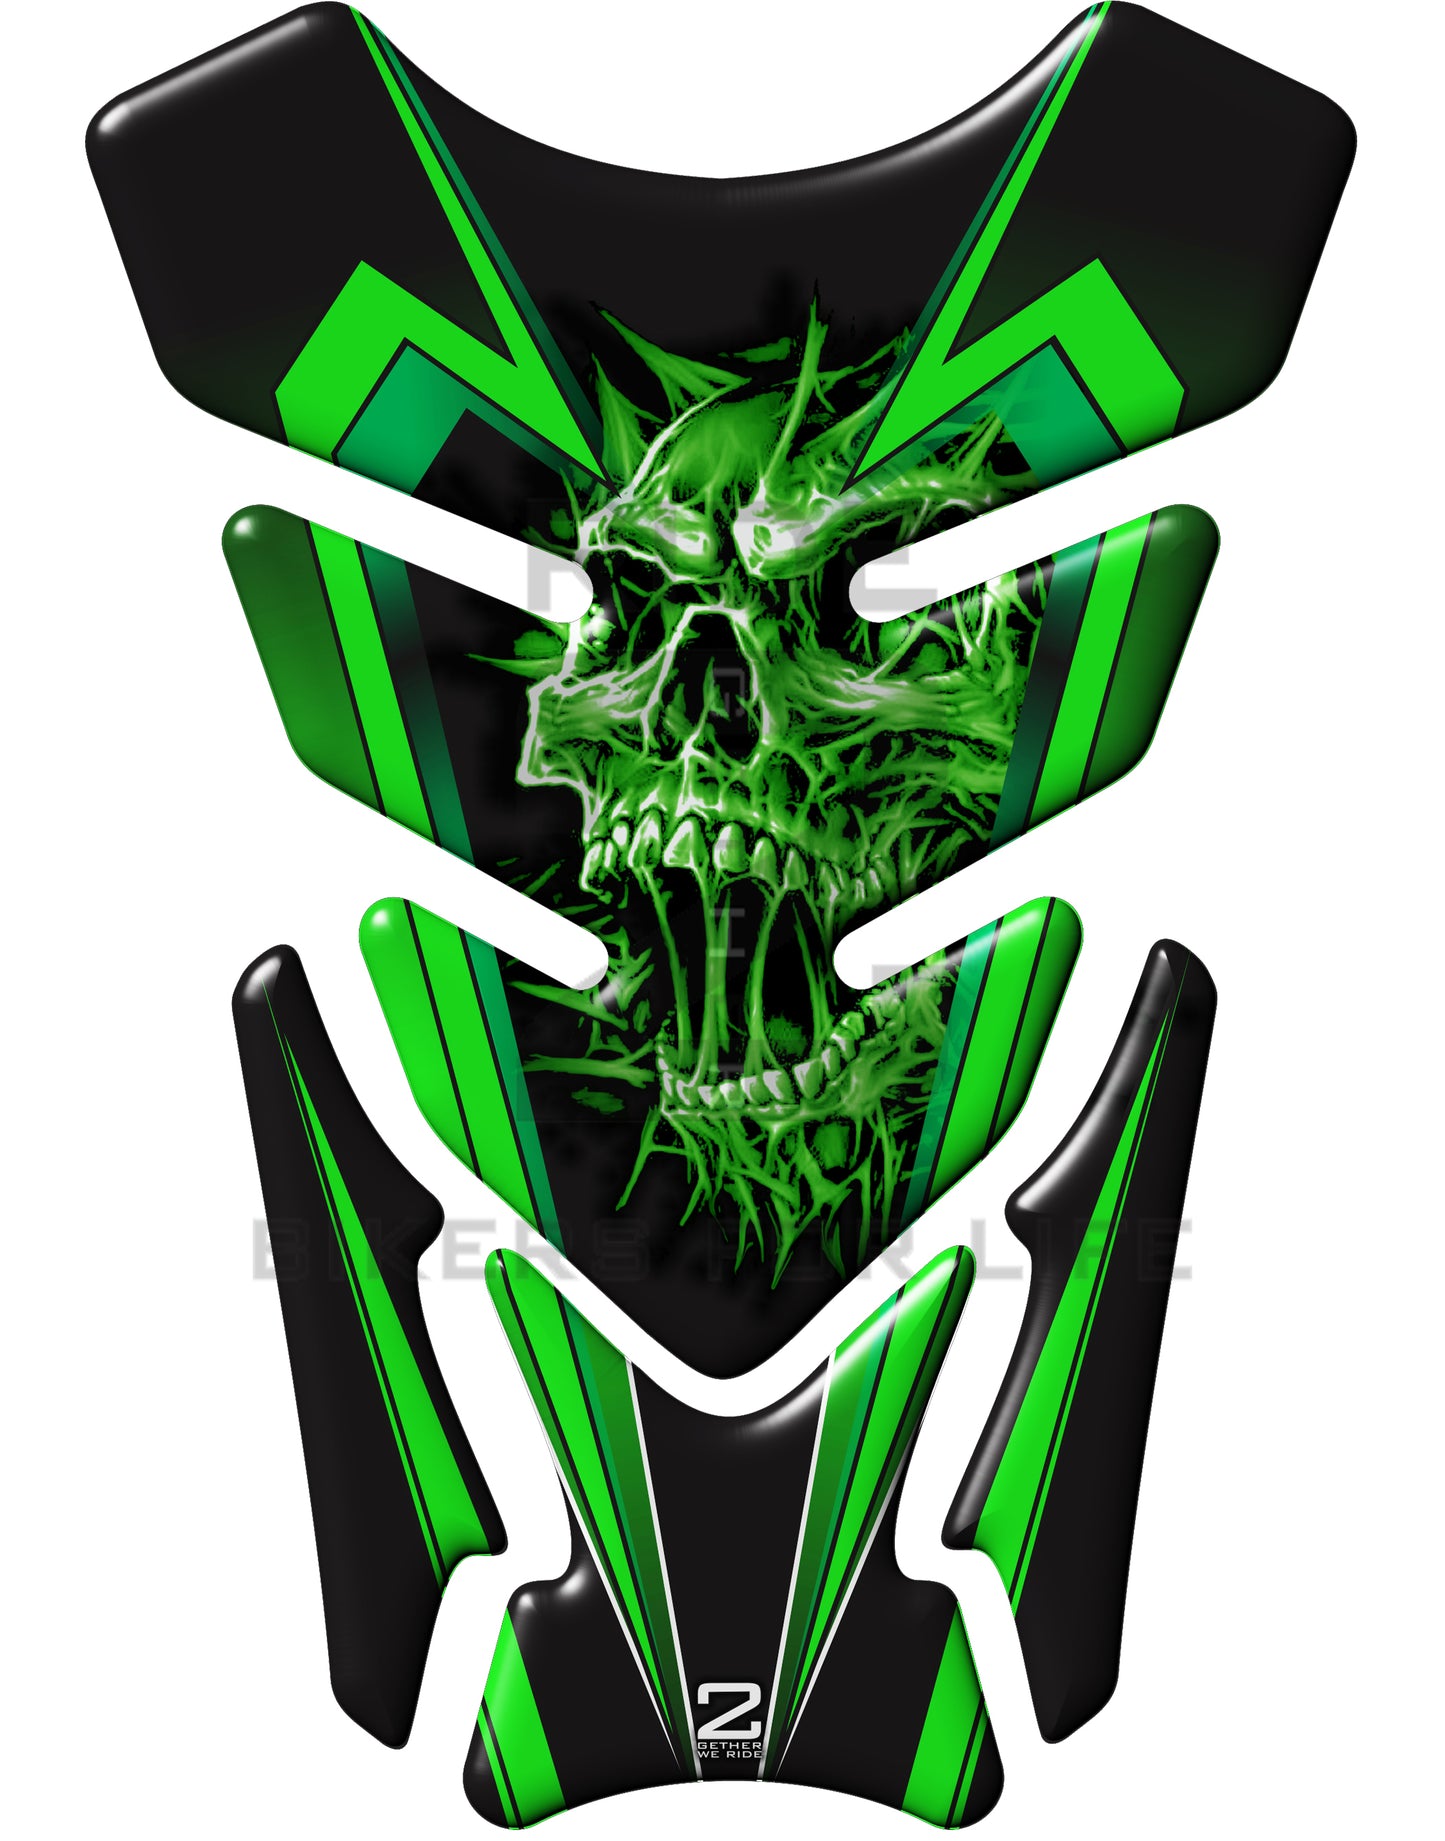 Universal Fit Green Screaming Skull Motor Bike Tank Pad Protector. A Street Pad which fits most motorcycles.